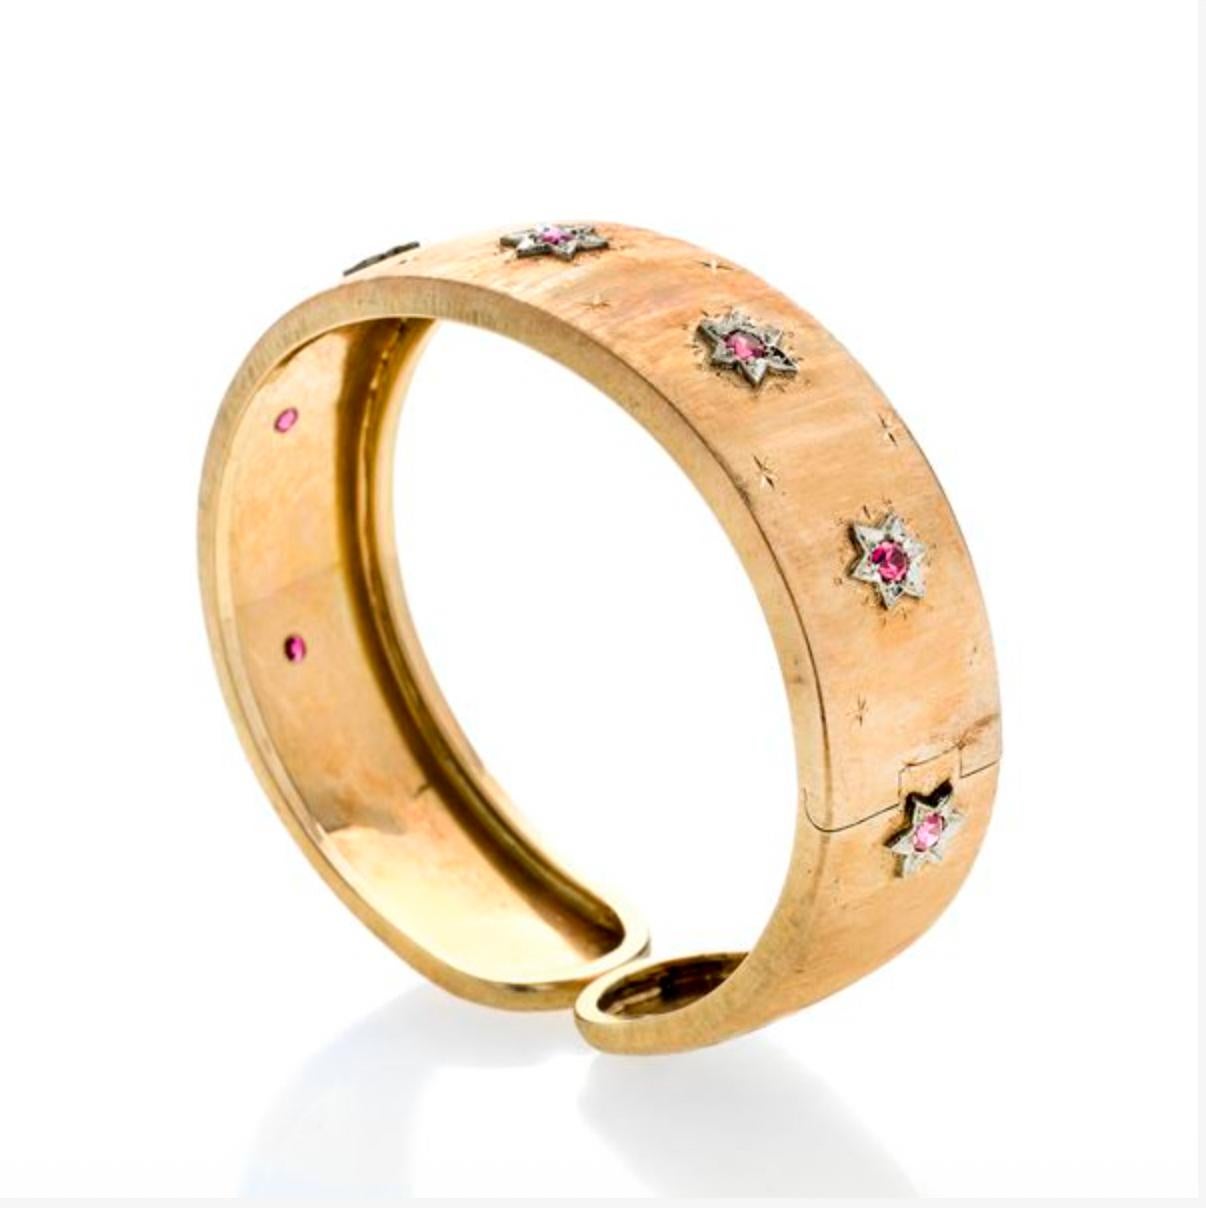 Florentine style bangle bracelet made with engraved yellow gold embellished with seven stars, each with a small ruby. The bracelet can be opened to fit wrist.
Made in Italy, Florence, 1990s
MEASUREMENTS: internal diameter 6 cm WEIGHT: 40.5 gr